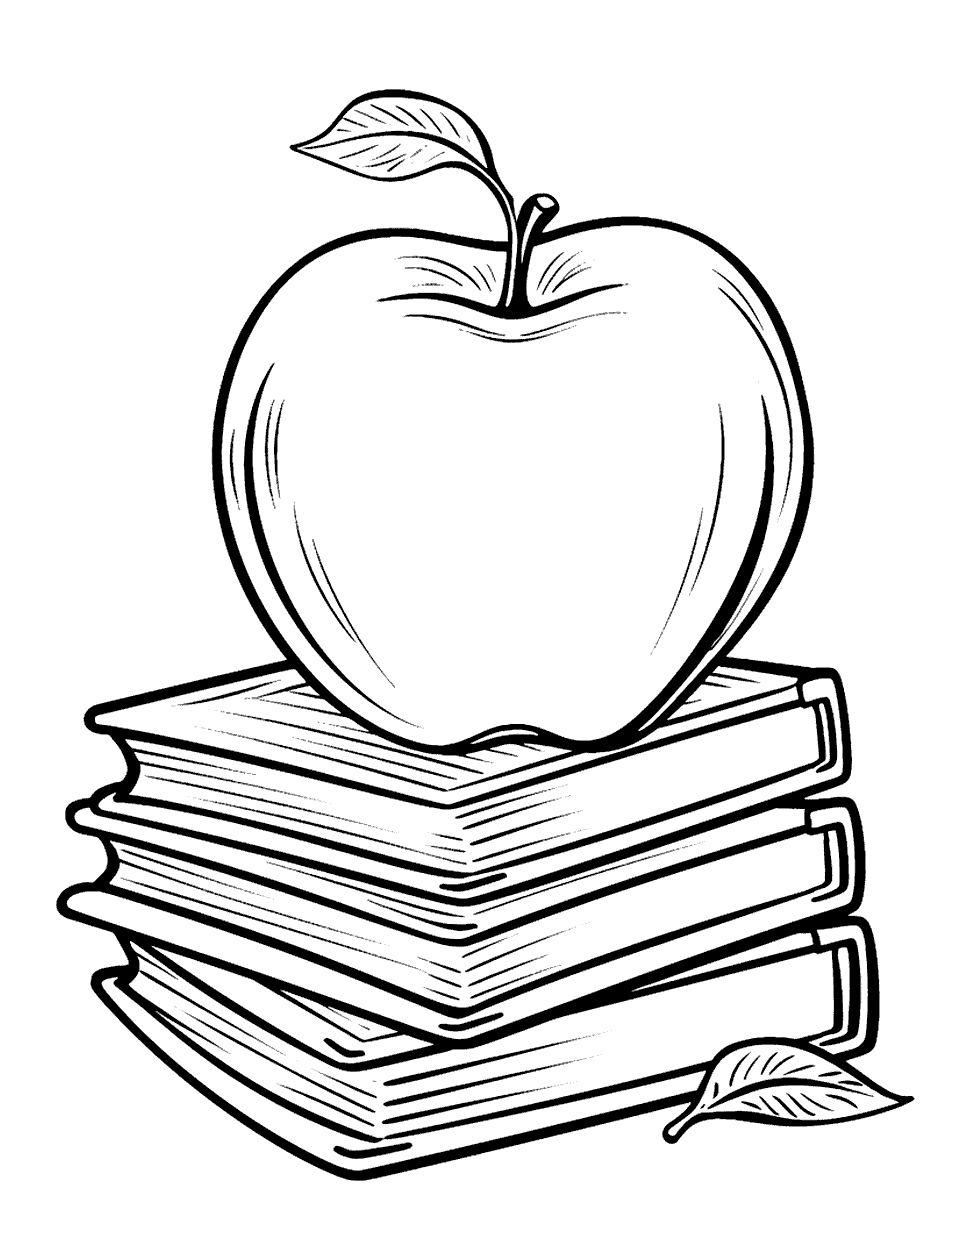 Teacher's Apple on a Book Coloring Page - An apple on top of a stack of books, symbolizing education.